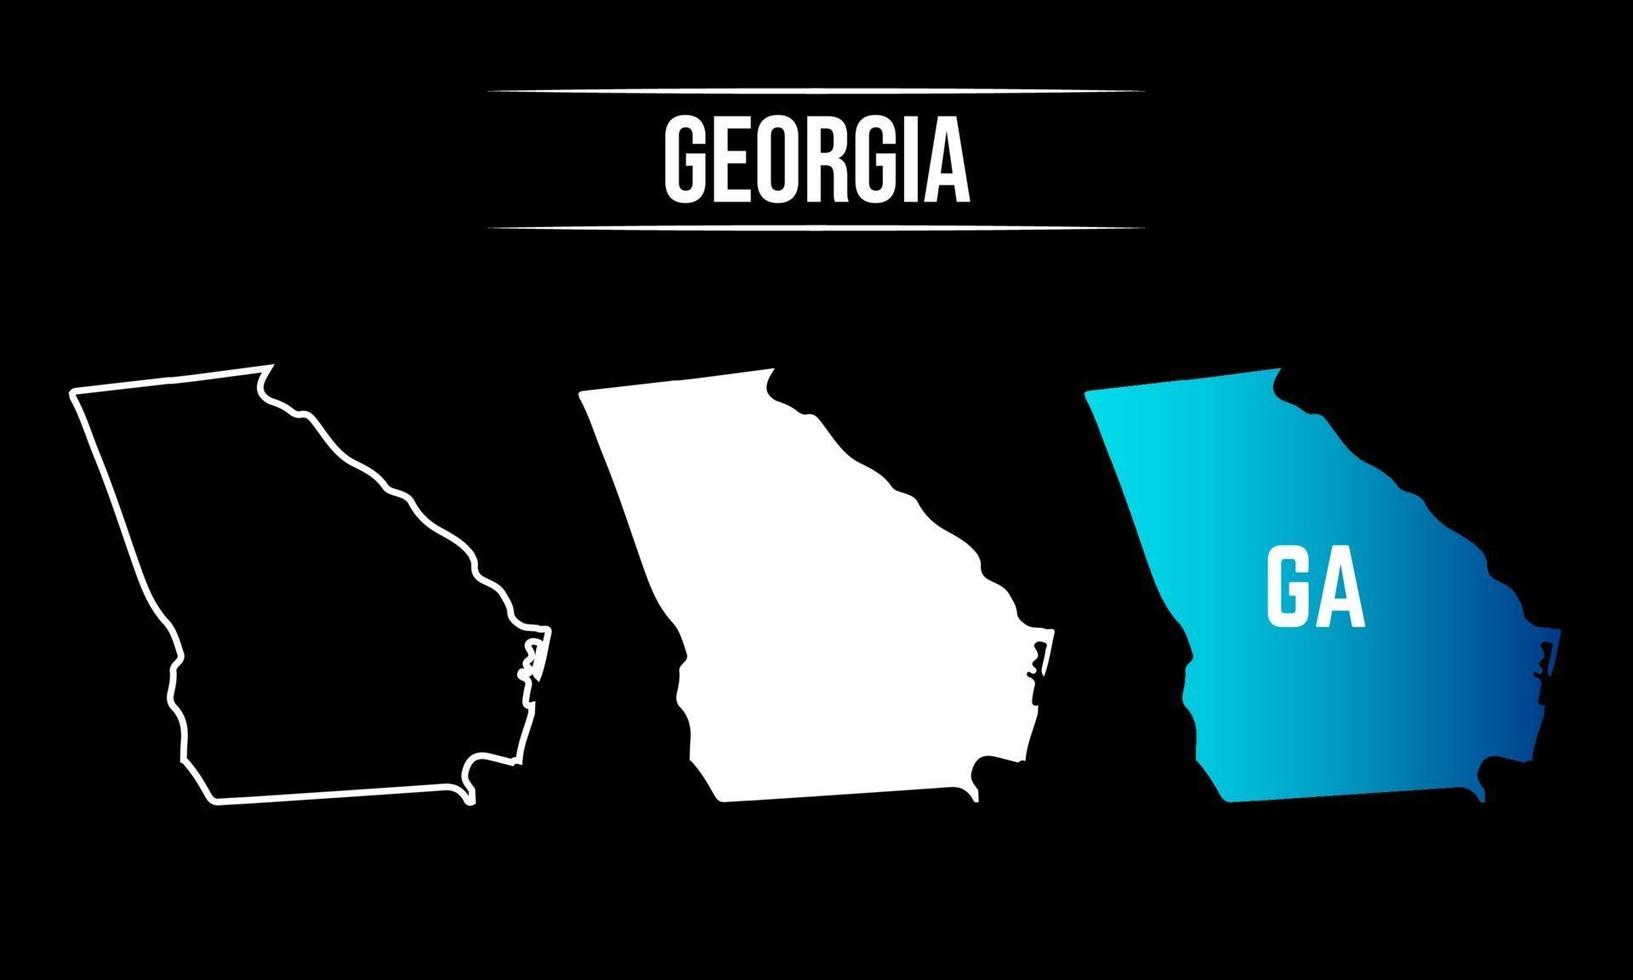 Abstract Georgia State Map Design vector